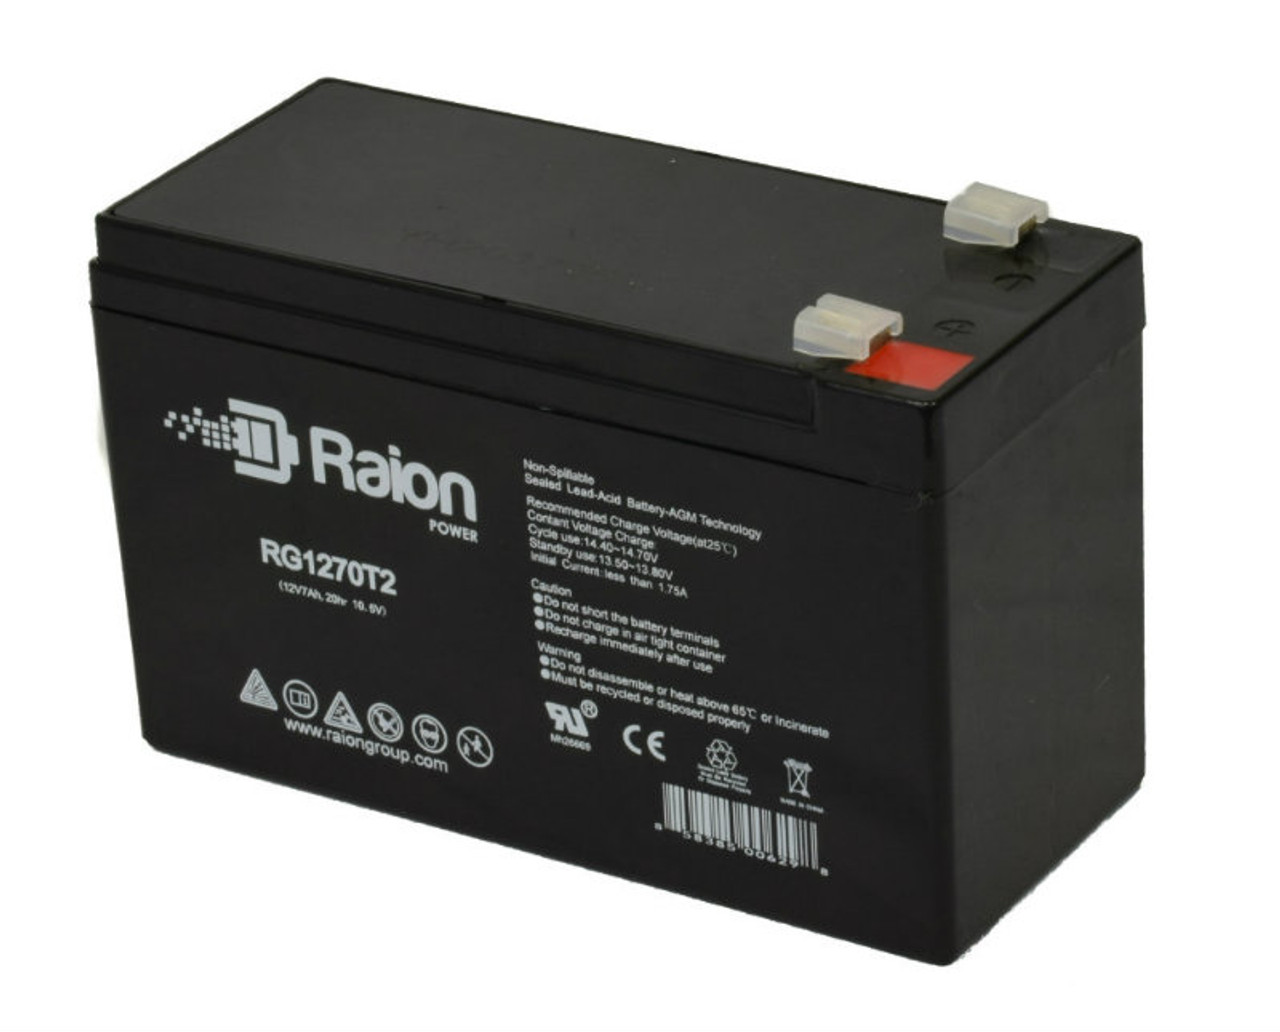 Raion Power RG1270T1 12V 7Ah Non-Spillable Replacement Battery for Panasonic LC-R127R2P